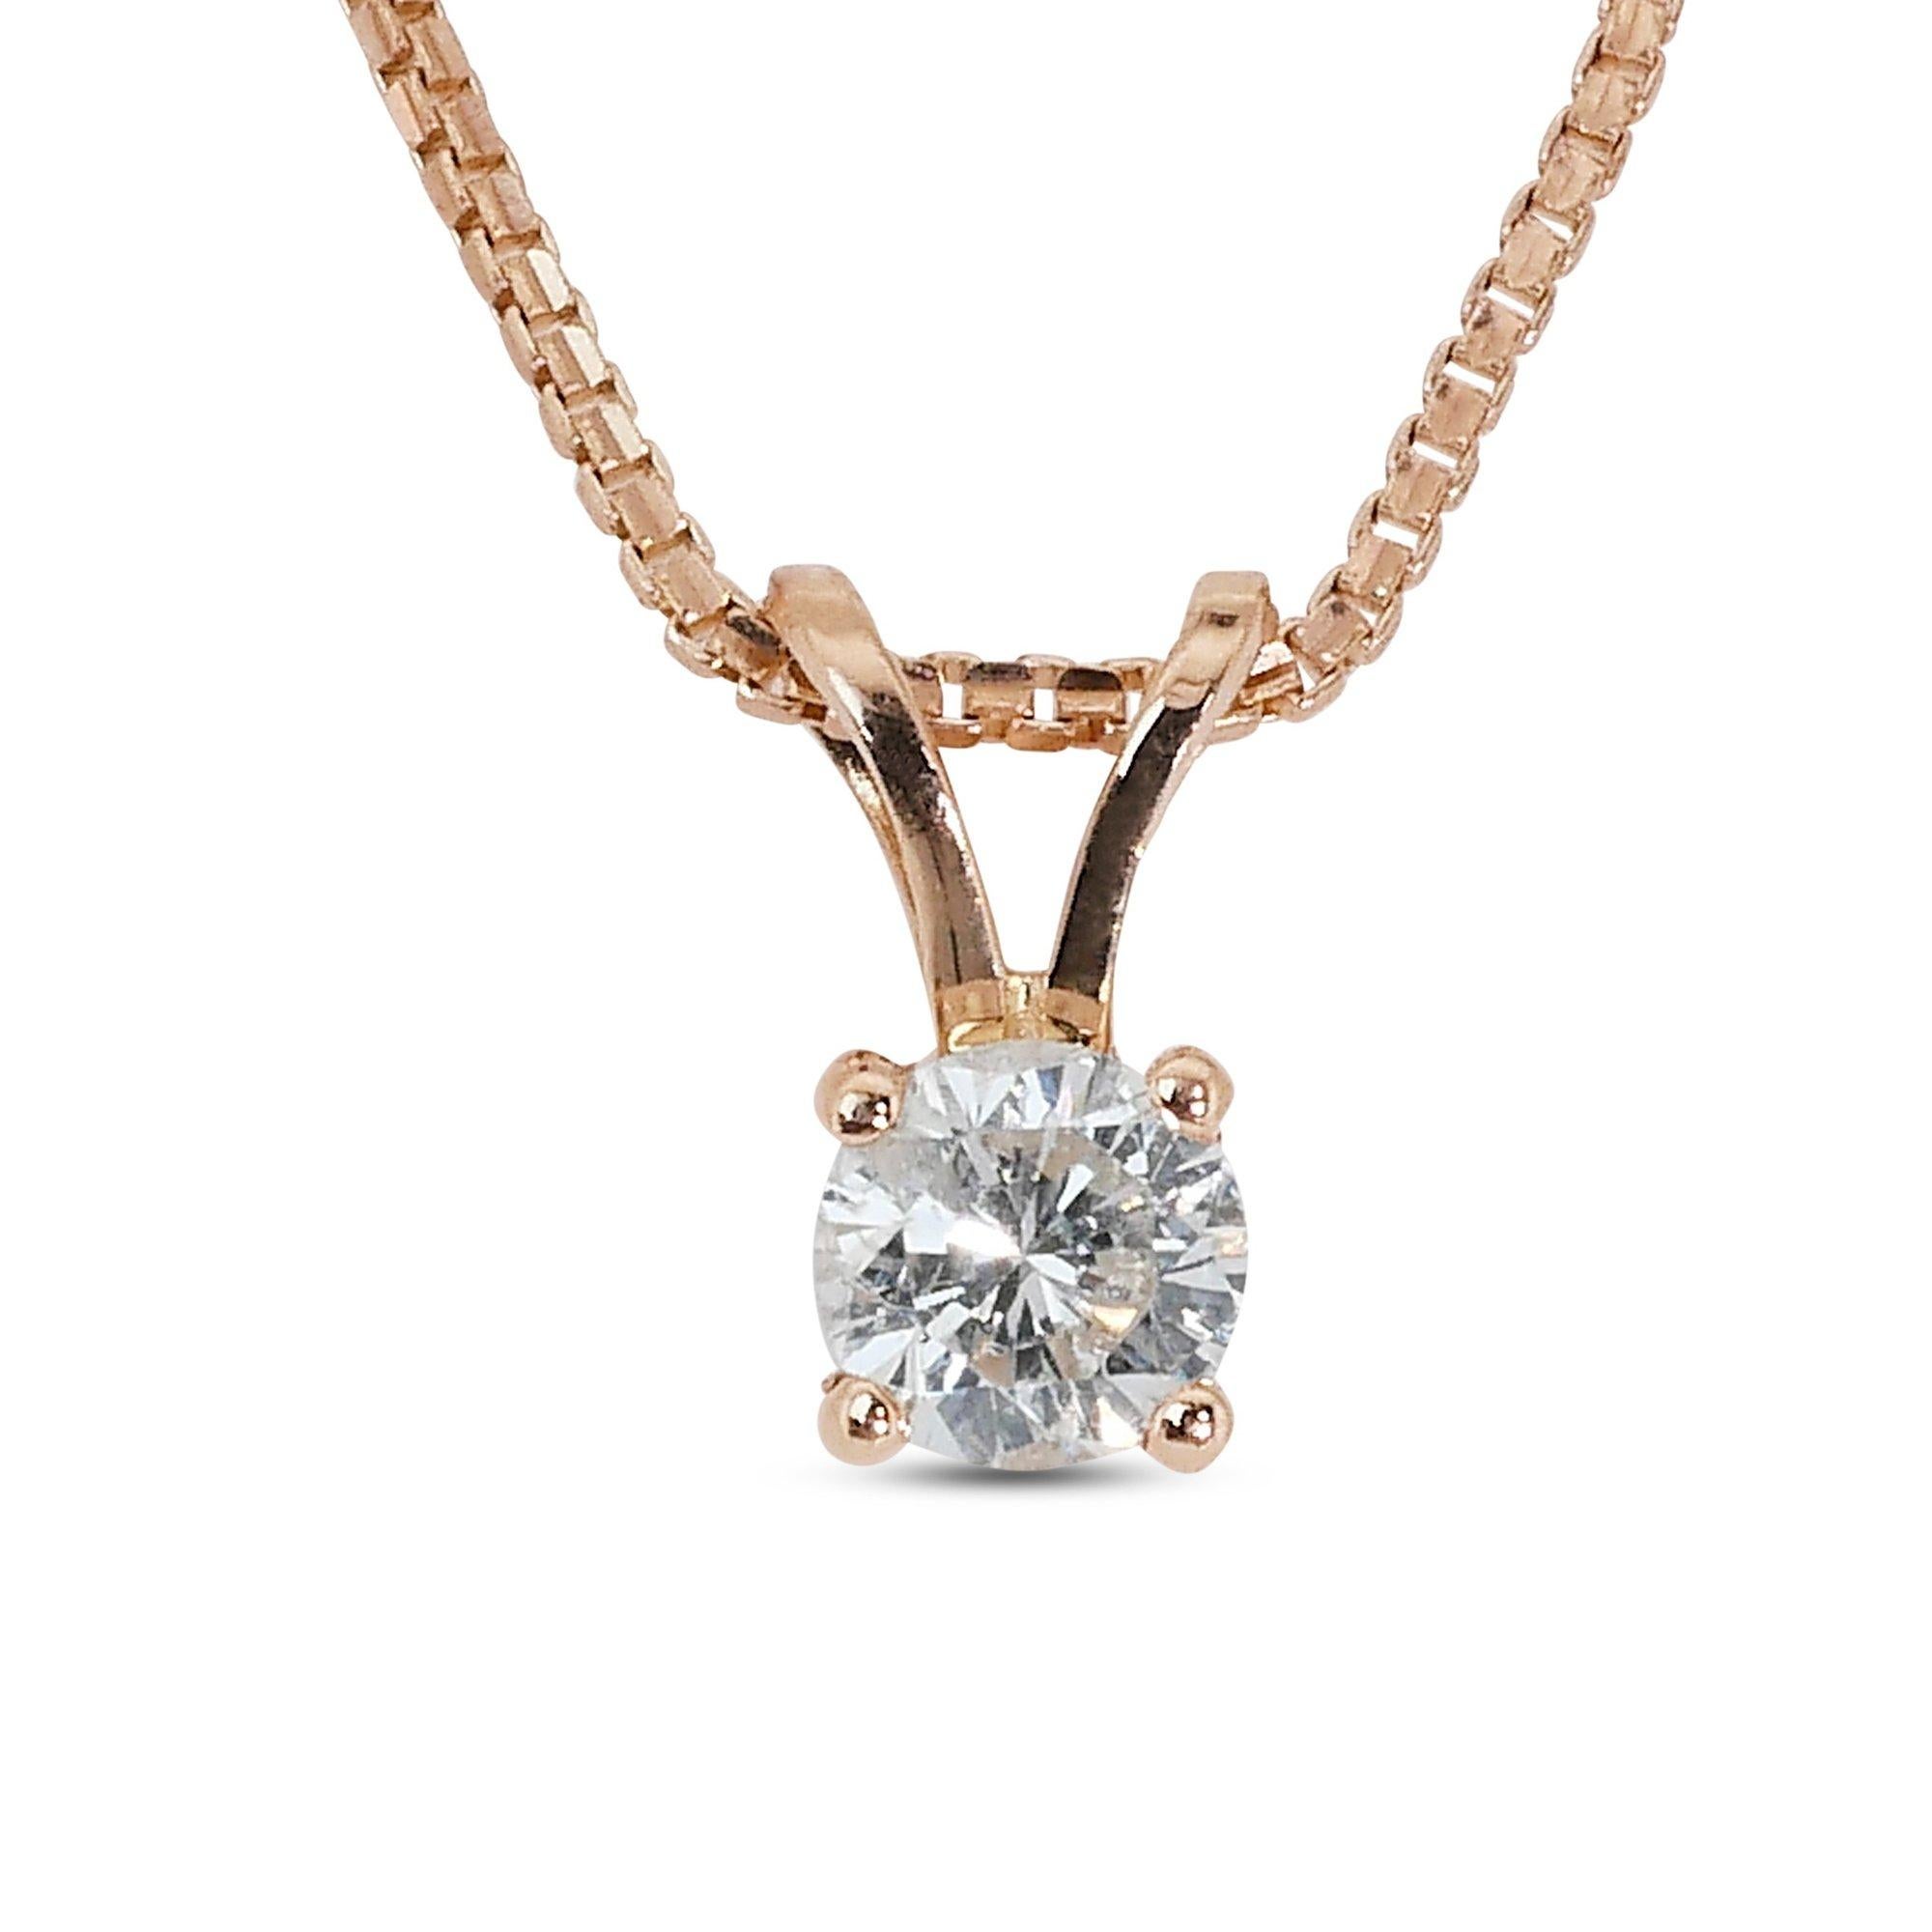 Elegant 0.70ct Round Diamond Pendant Solitaire Necklace in 18k Rose Gold - GIA  For Sale 3